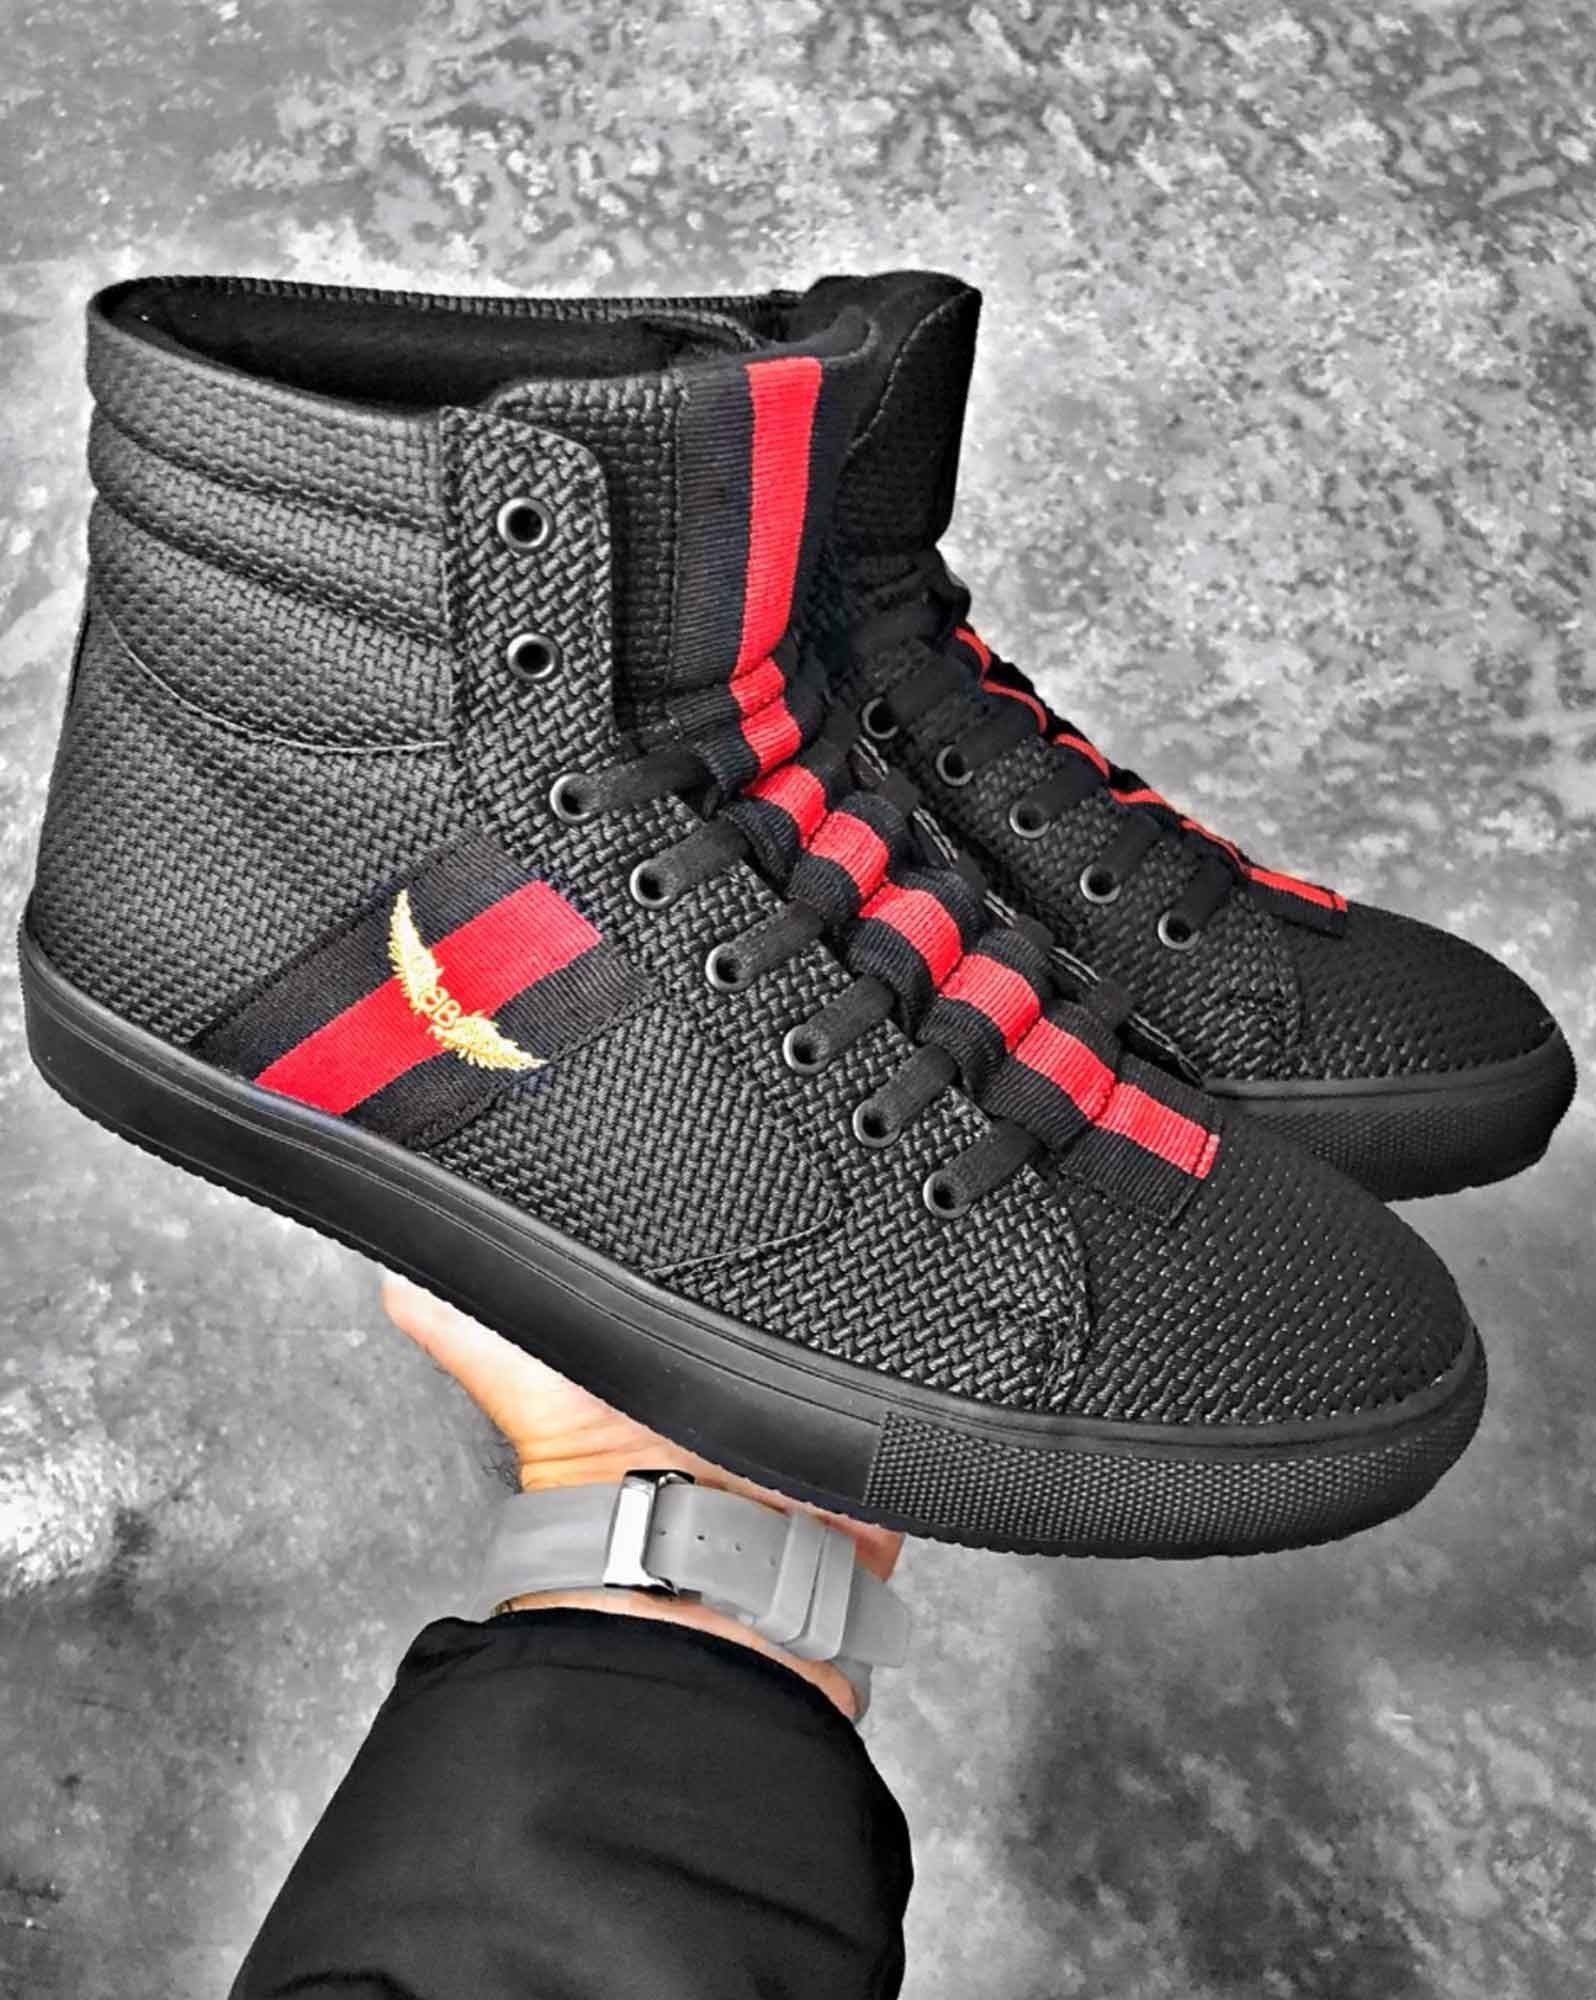 Black high-top sneakers with red black stripes on the front and side